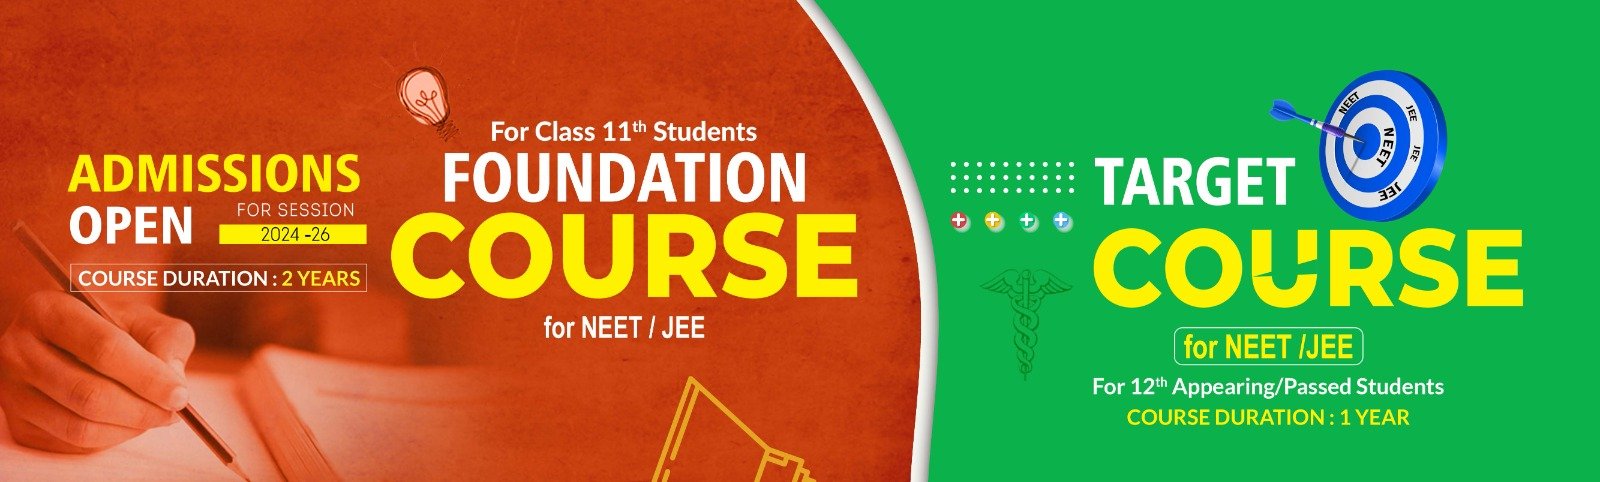 Foundation Course for class 11